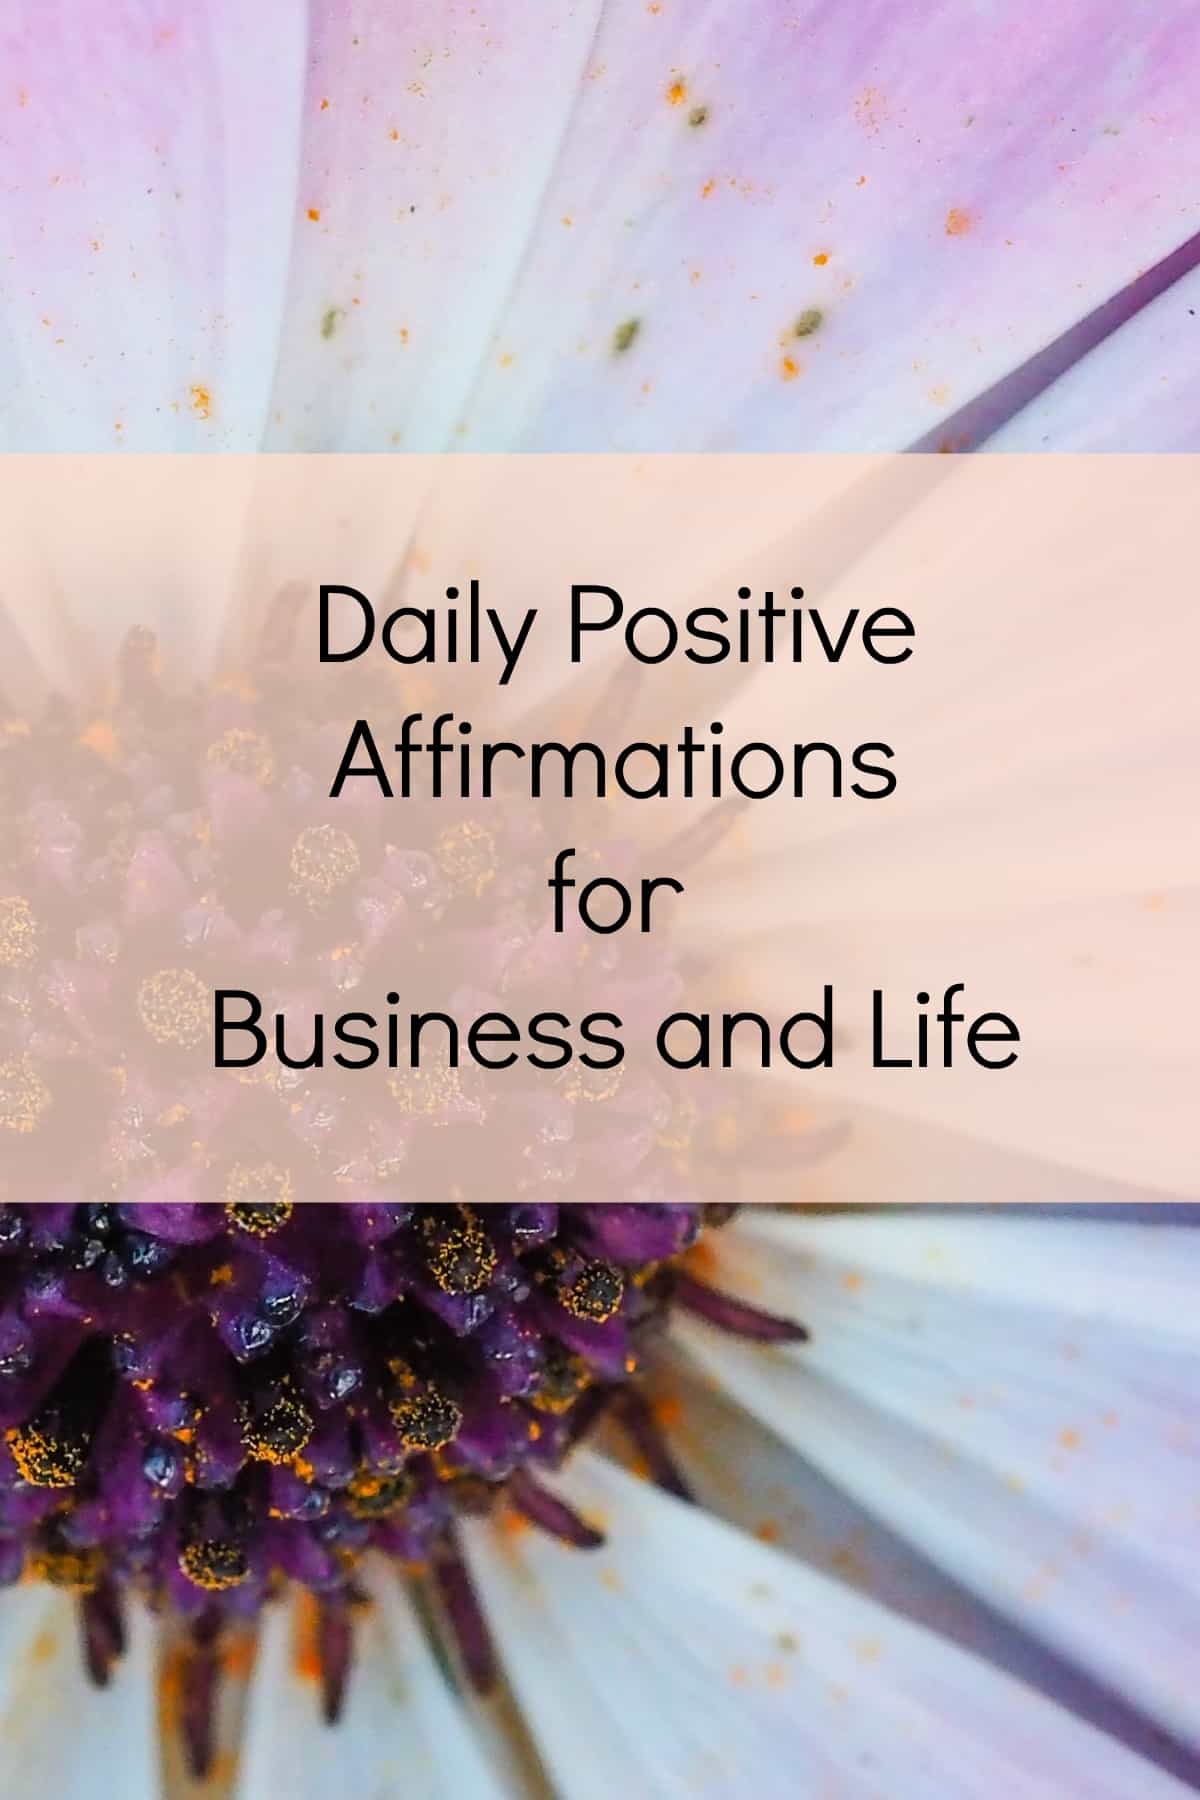 Daily Positive Affirmations for Business and Life